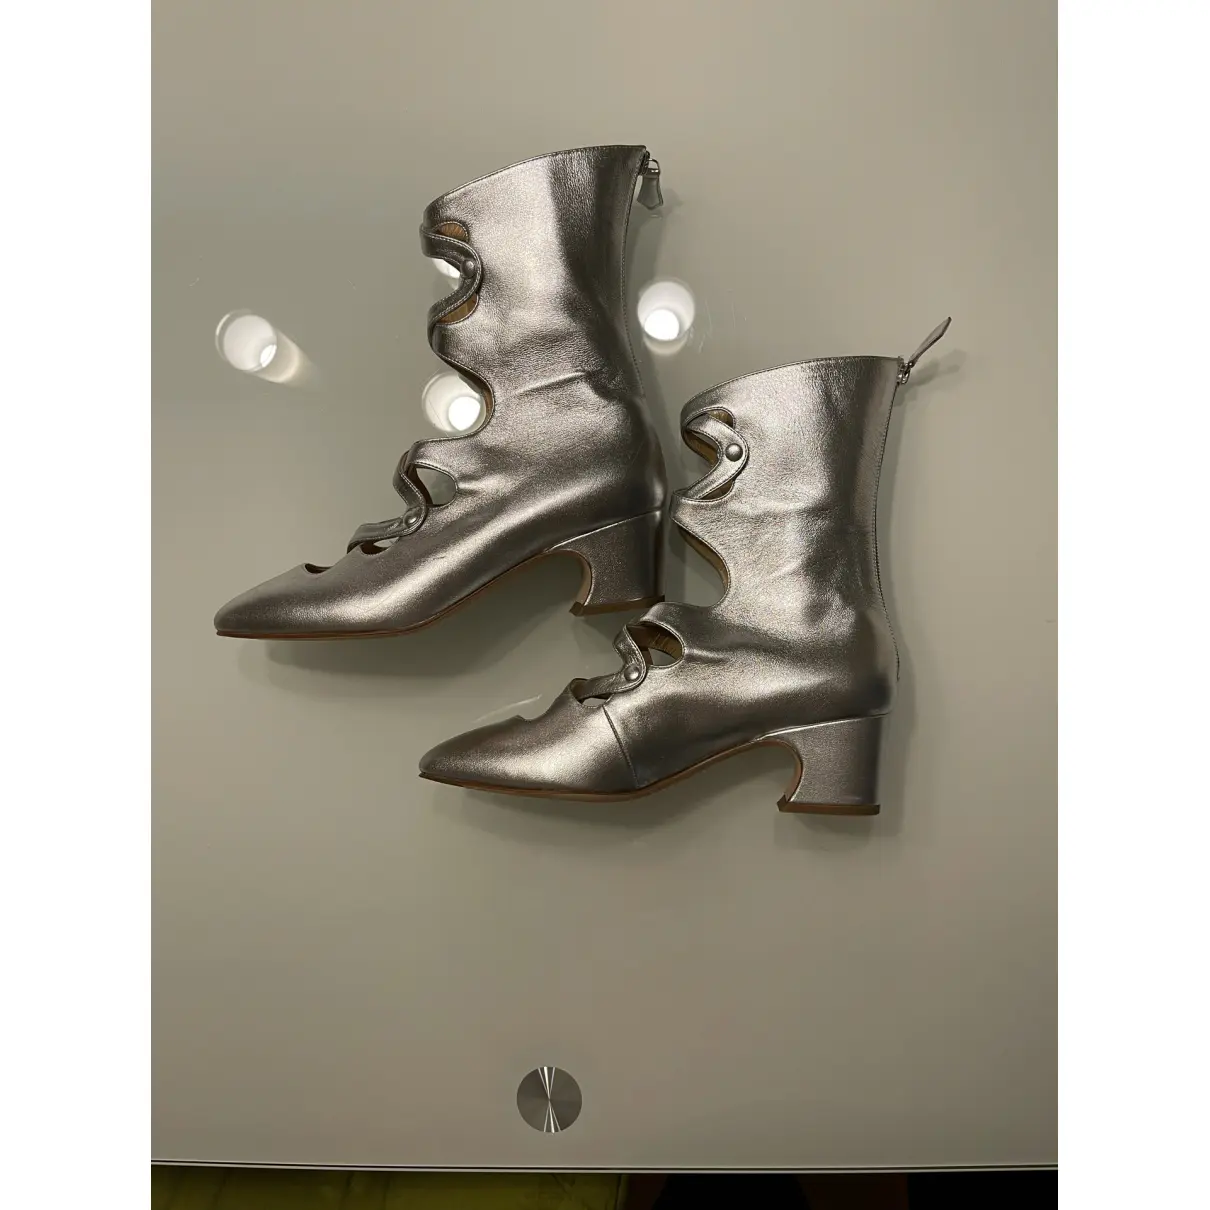 Buy Liudmila Leather boots online